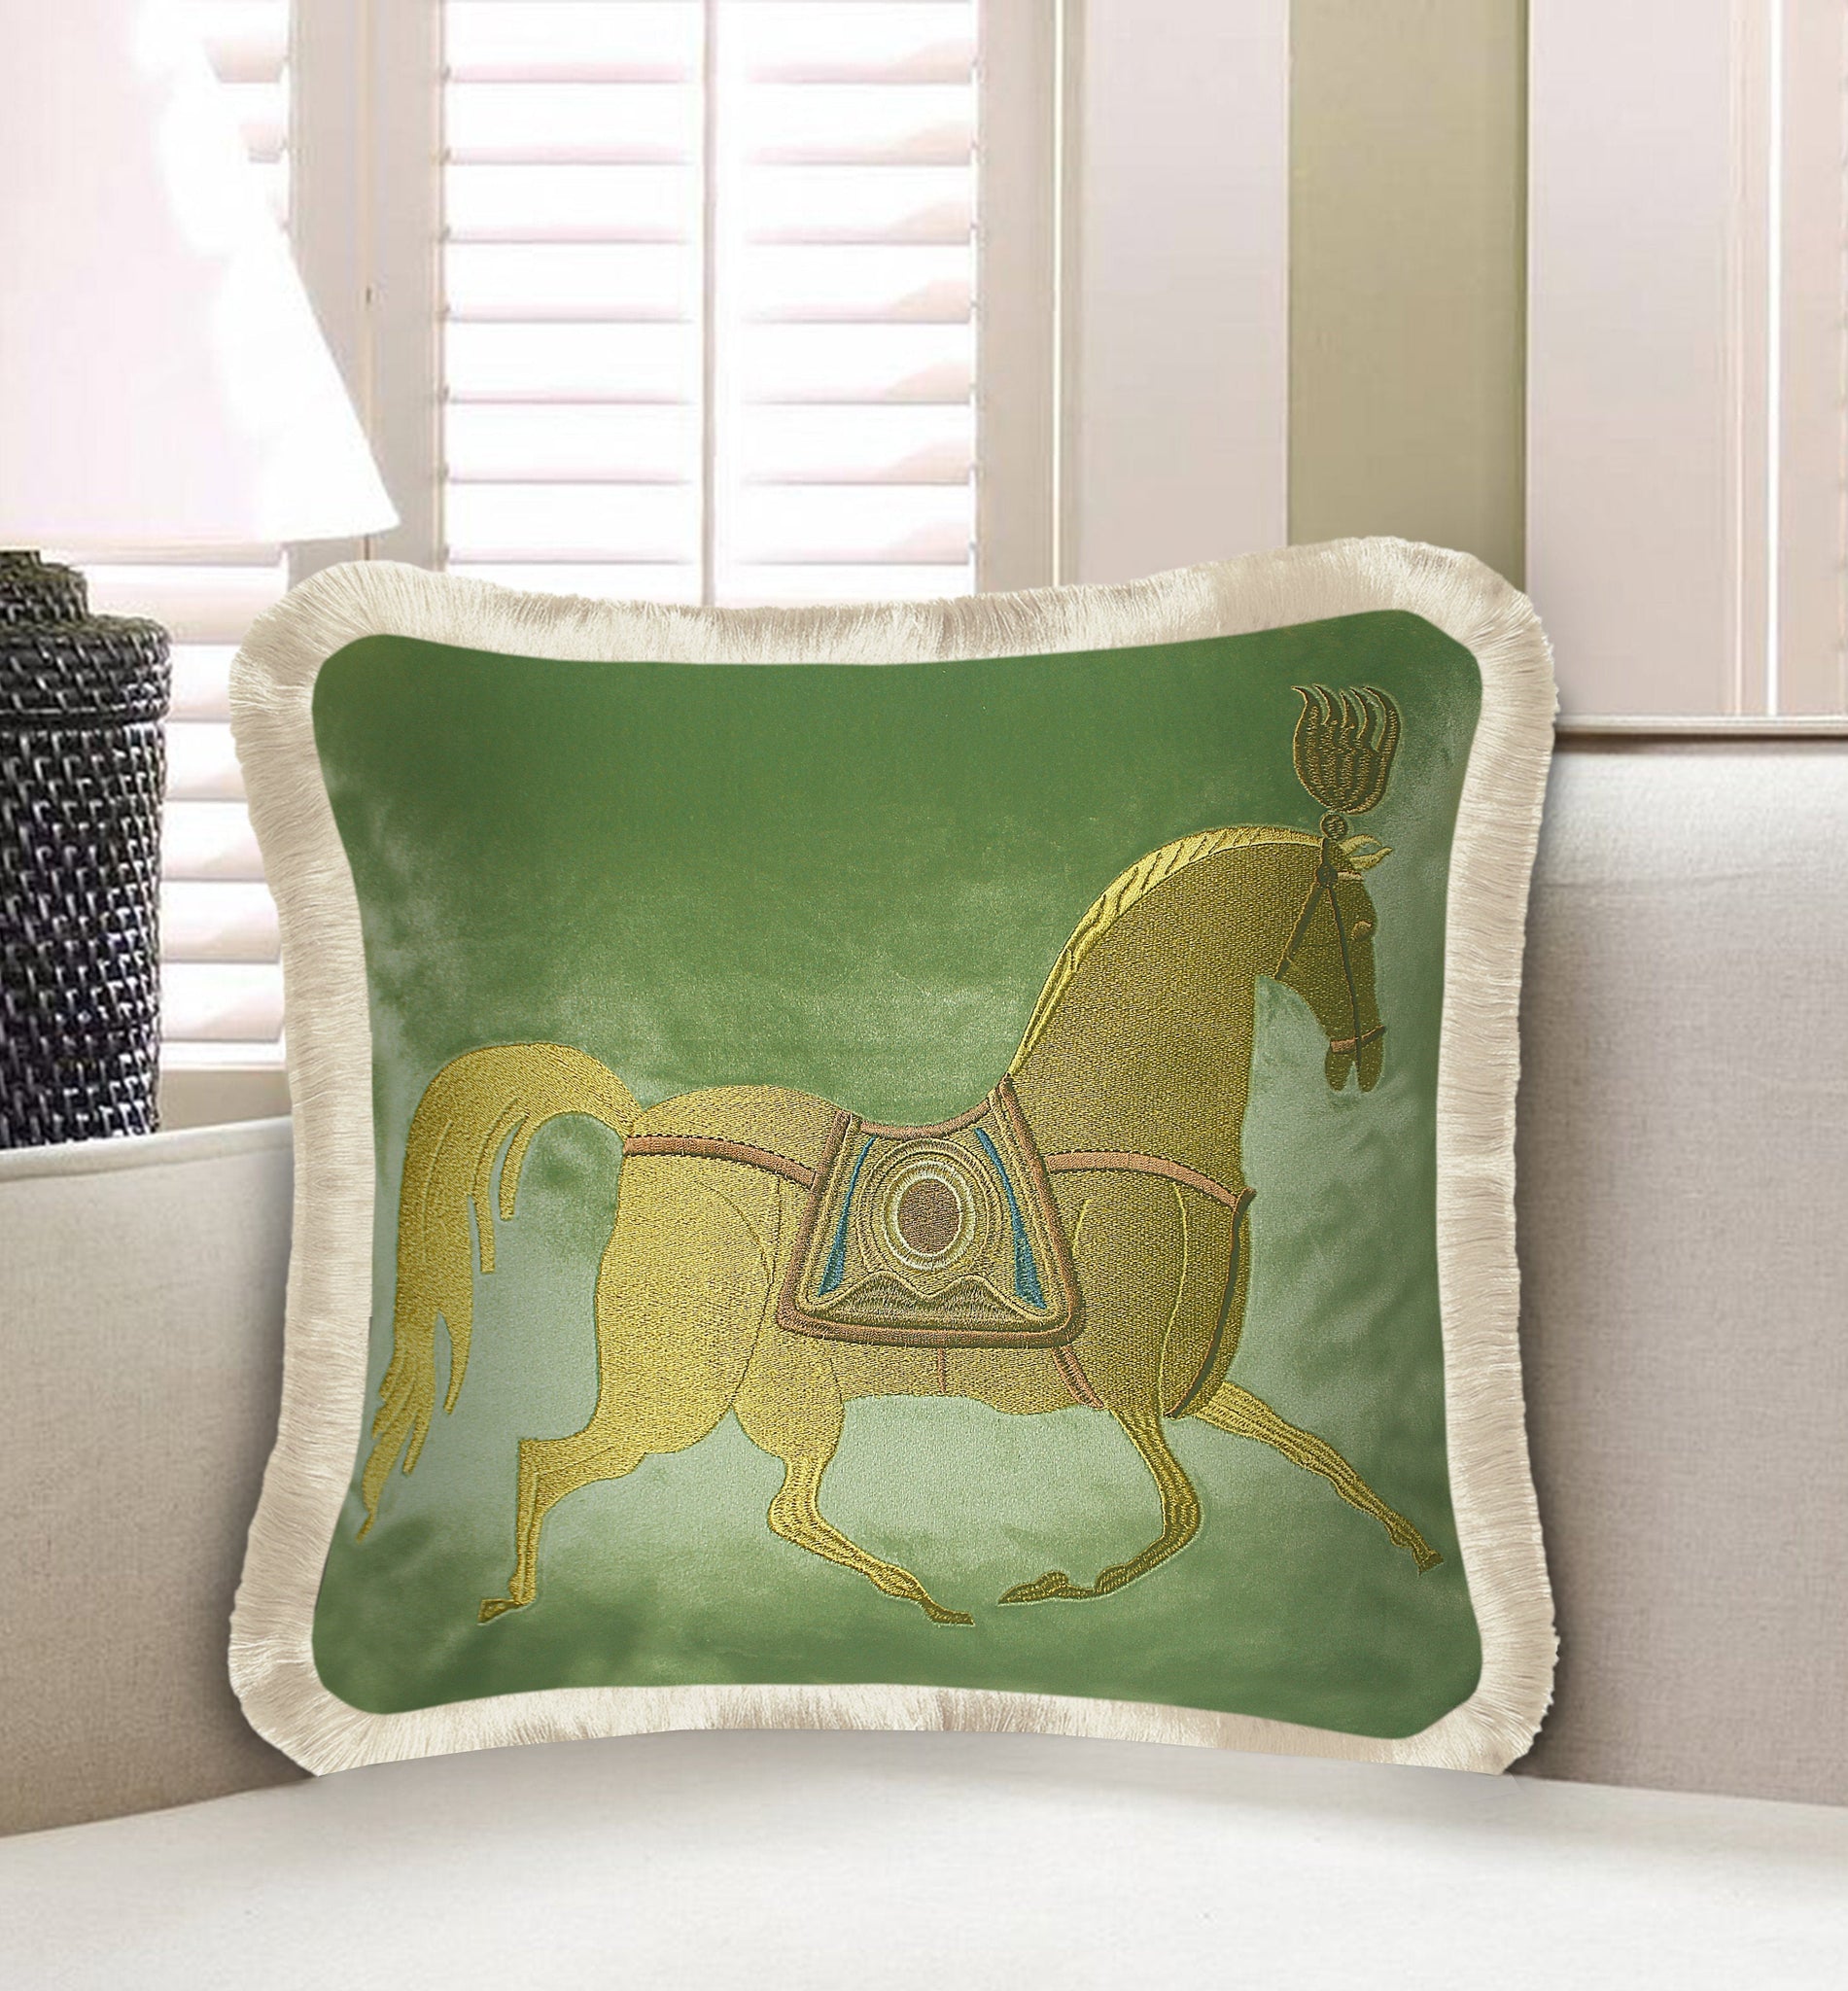 Green Luxury Classic Horse Embroidery Baroque Style Decorative Cushion Cover Pillow Case Home European Sofa Throw Pillow